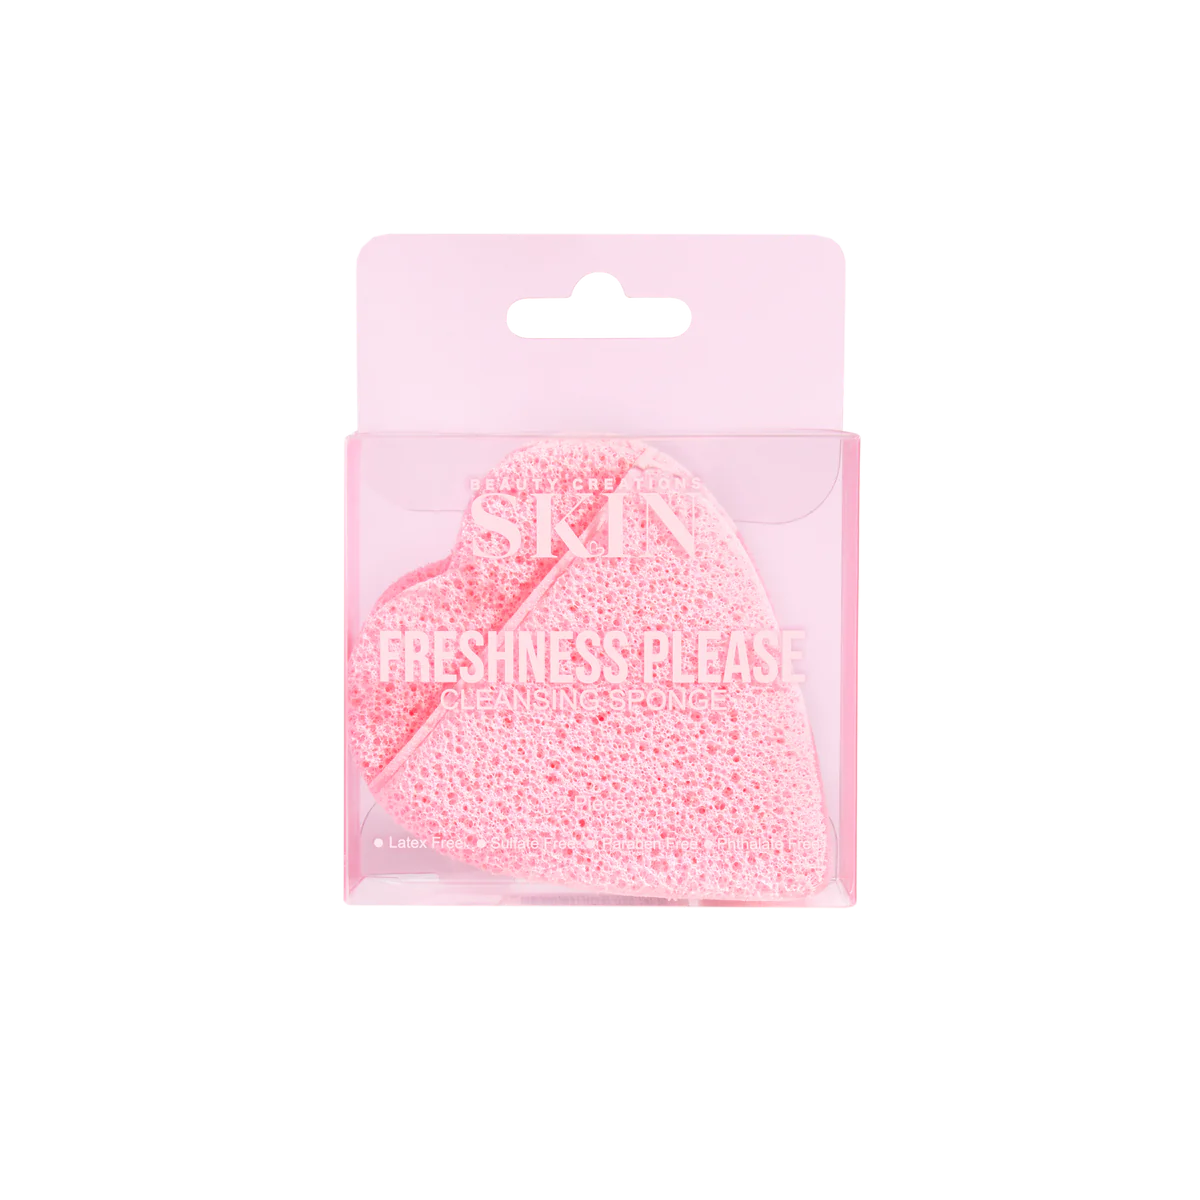 Beauty Creations SKIN Freshness Please Cleansing Sponges